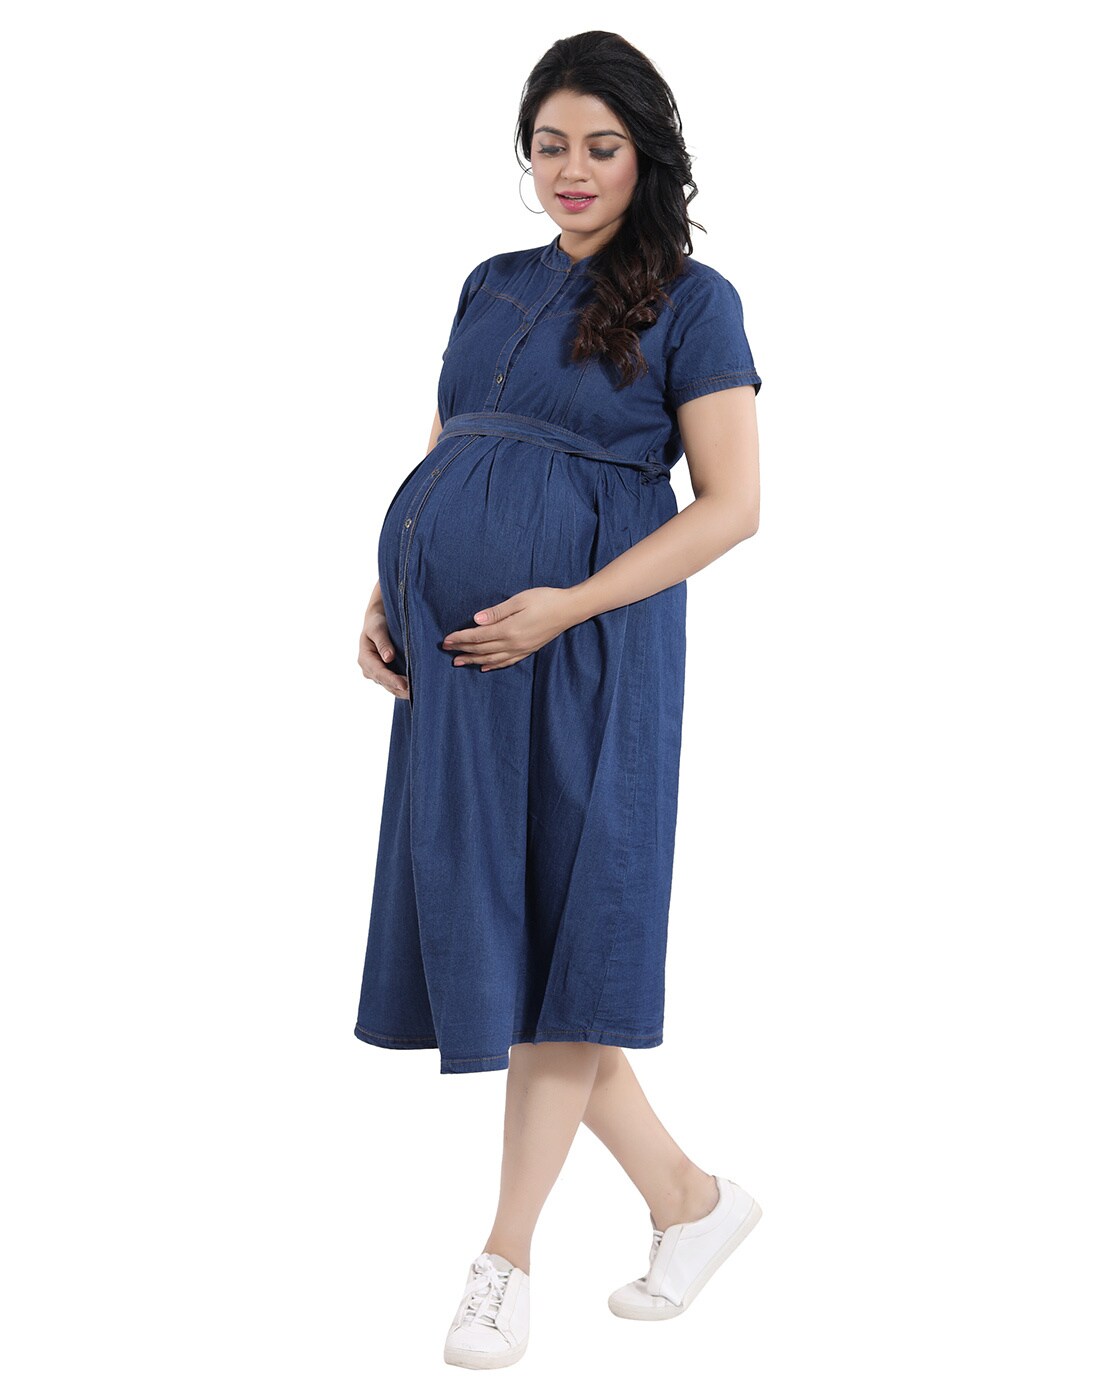 15 Maternity Outfits Using the Same Maternity Dress - Friday We're In Love